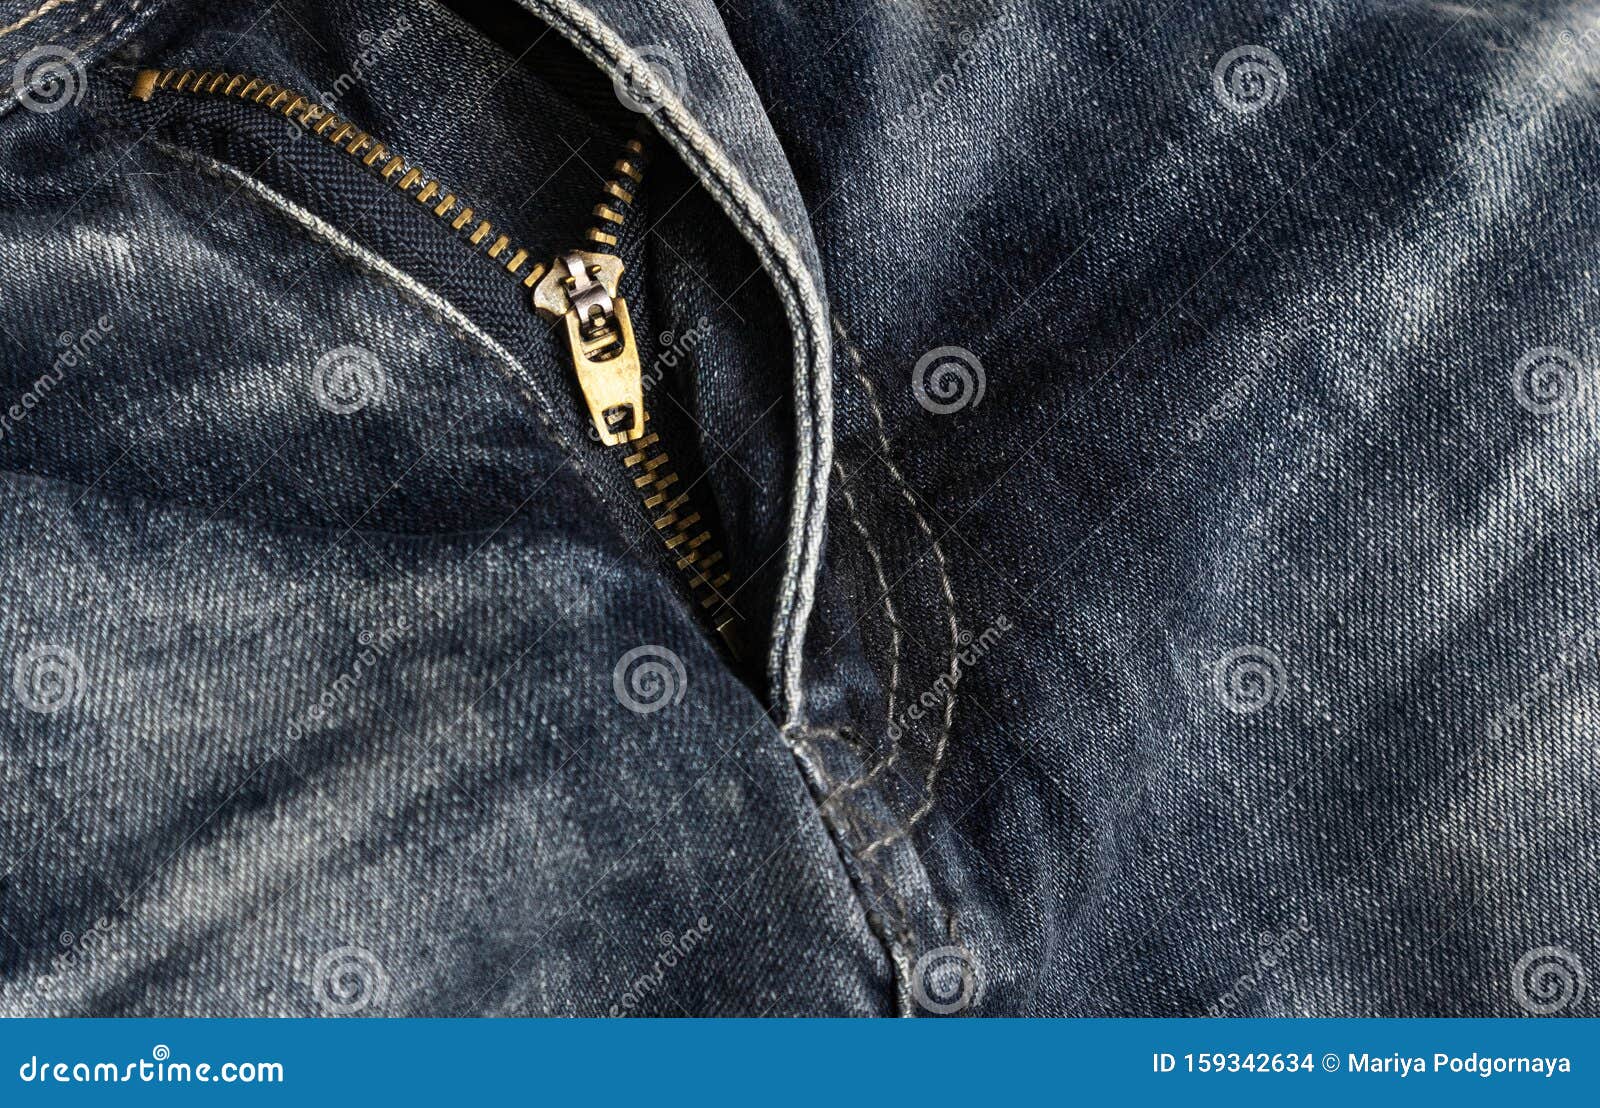 open up jeans